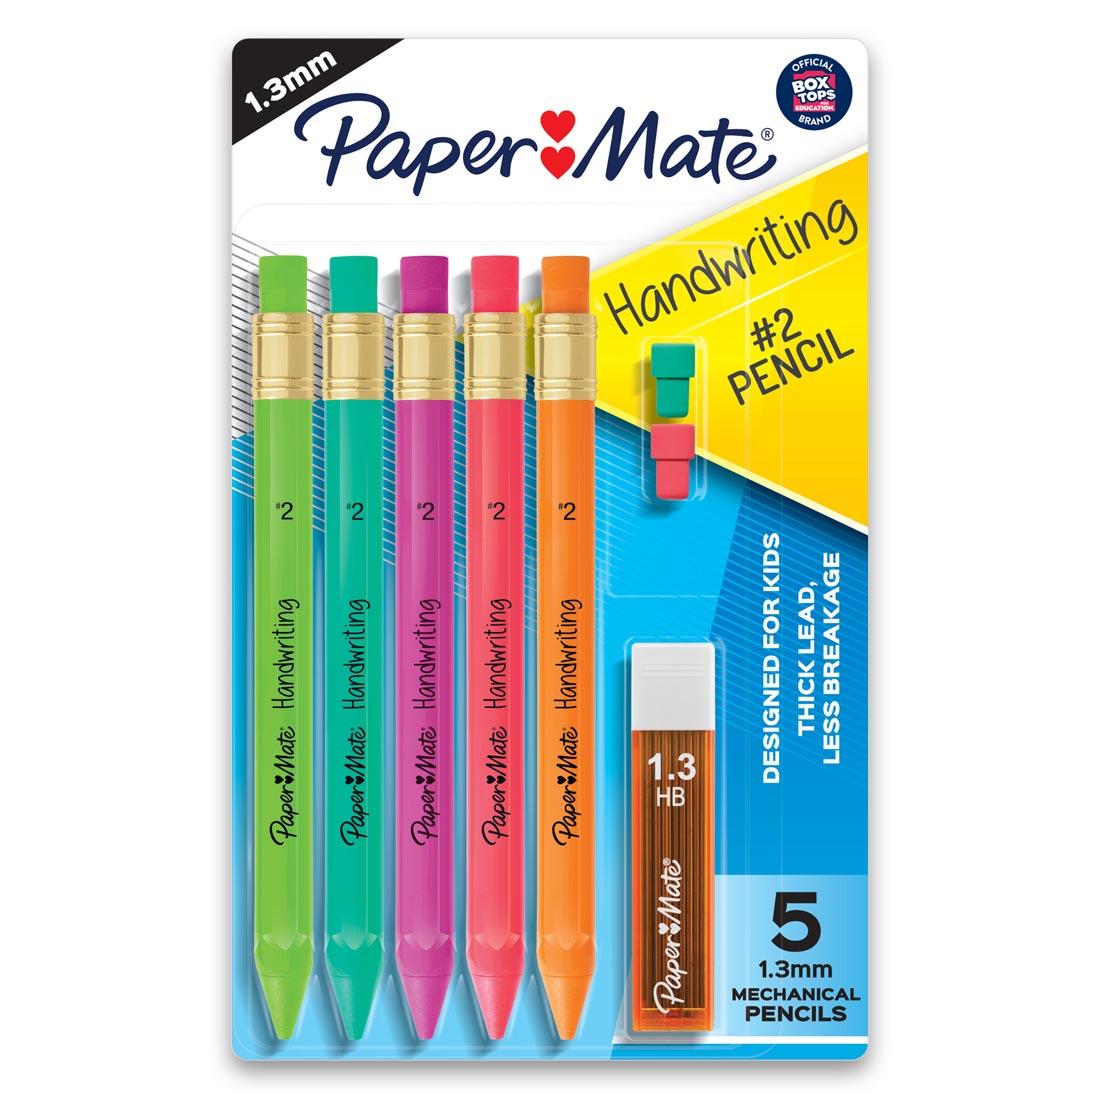 Package of 5 Paper Mate Handwriting Mechanical Pencils, 2 extra erasers and extra leads